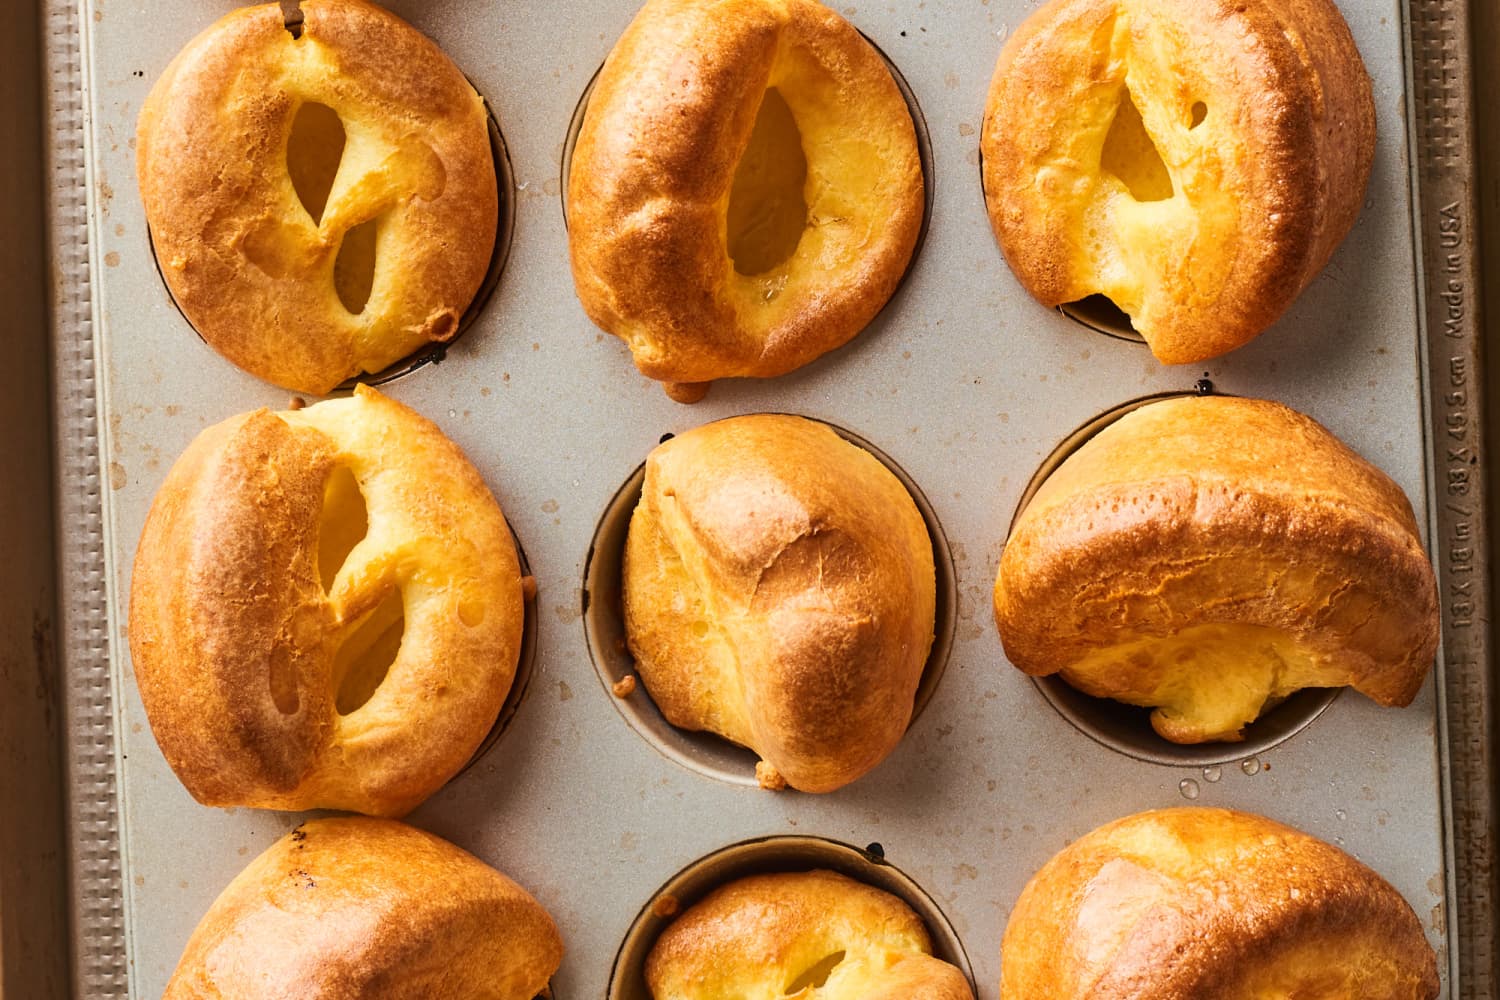 Best Yorkshire Pudding Recipe - How To Make Yorkshire Pudding